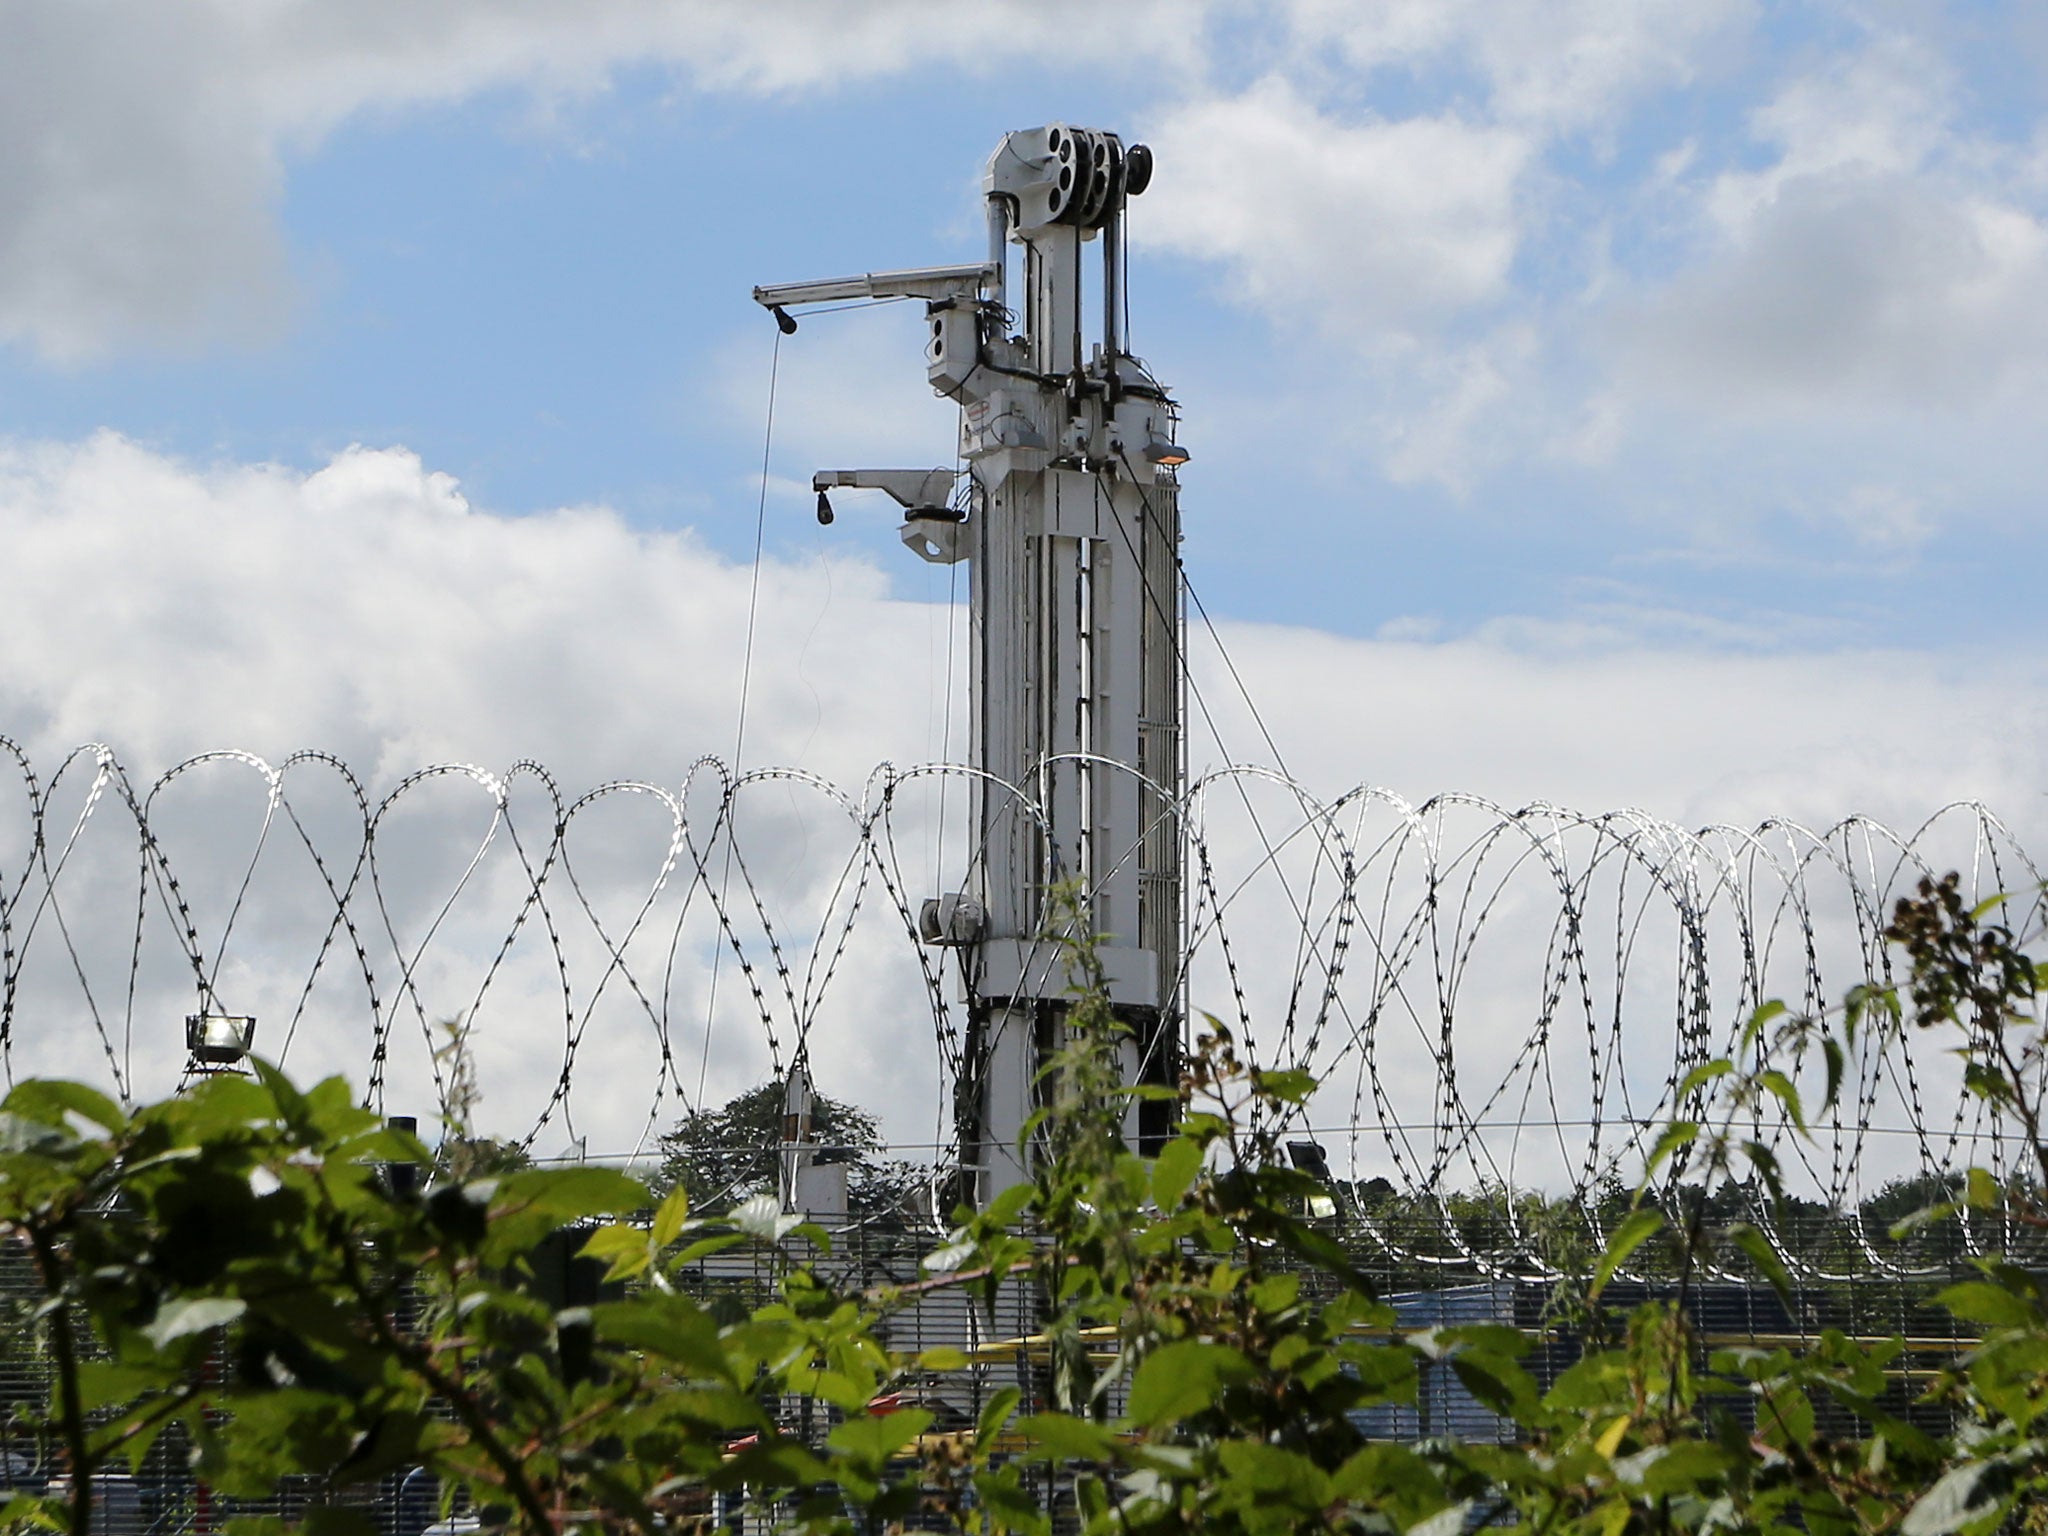 Drilling equipment at an exploration site for fracking in Balcombe, Sussex